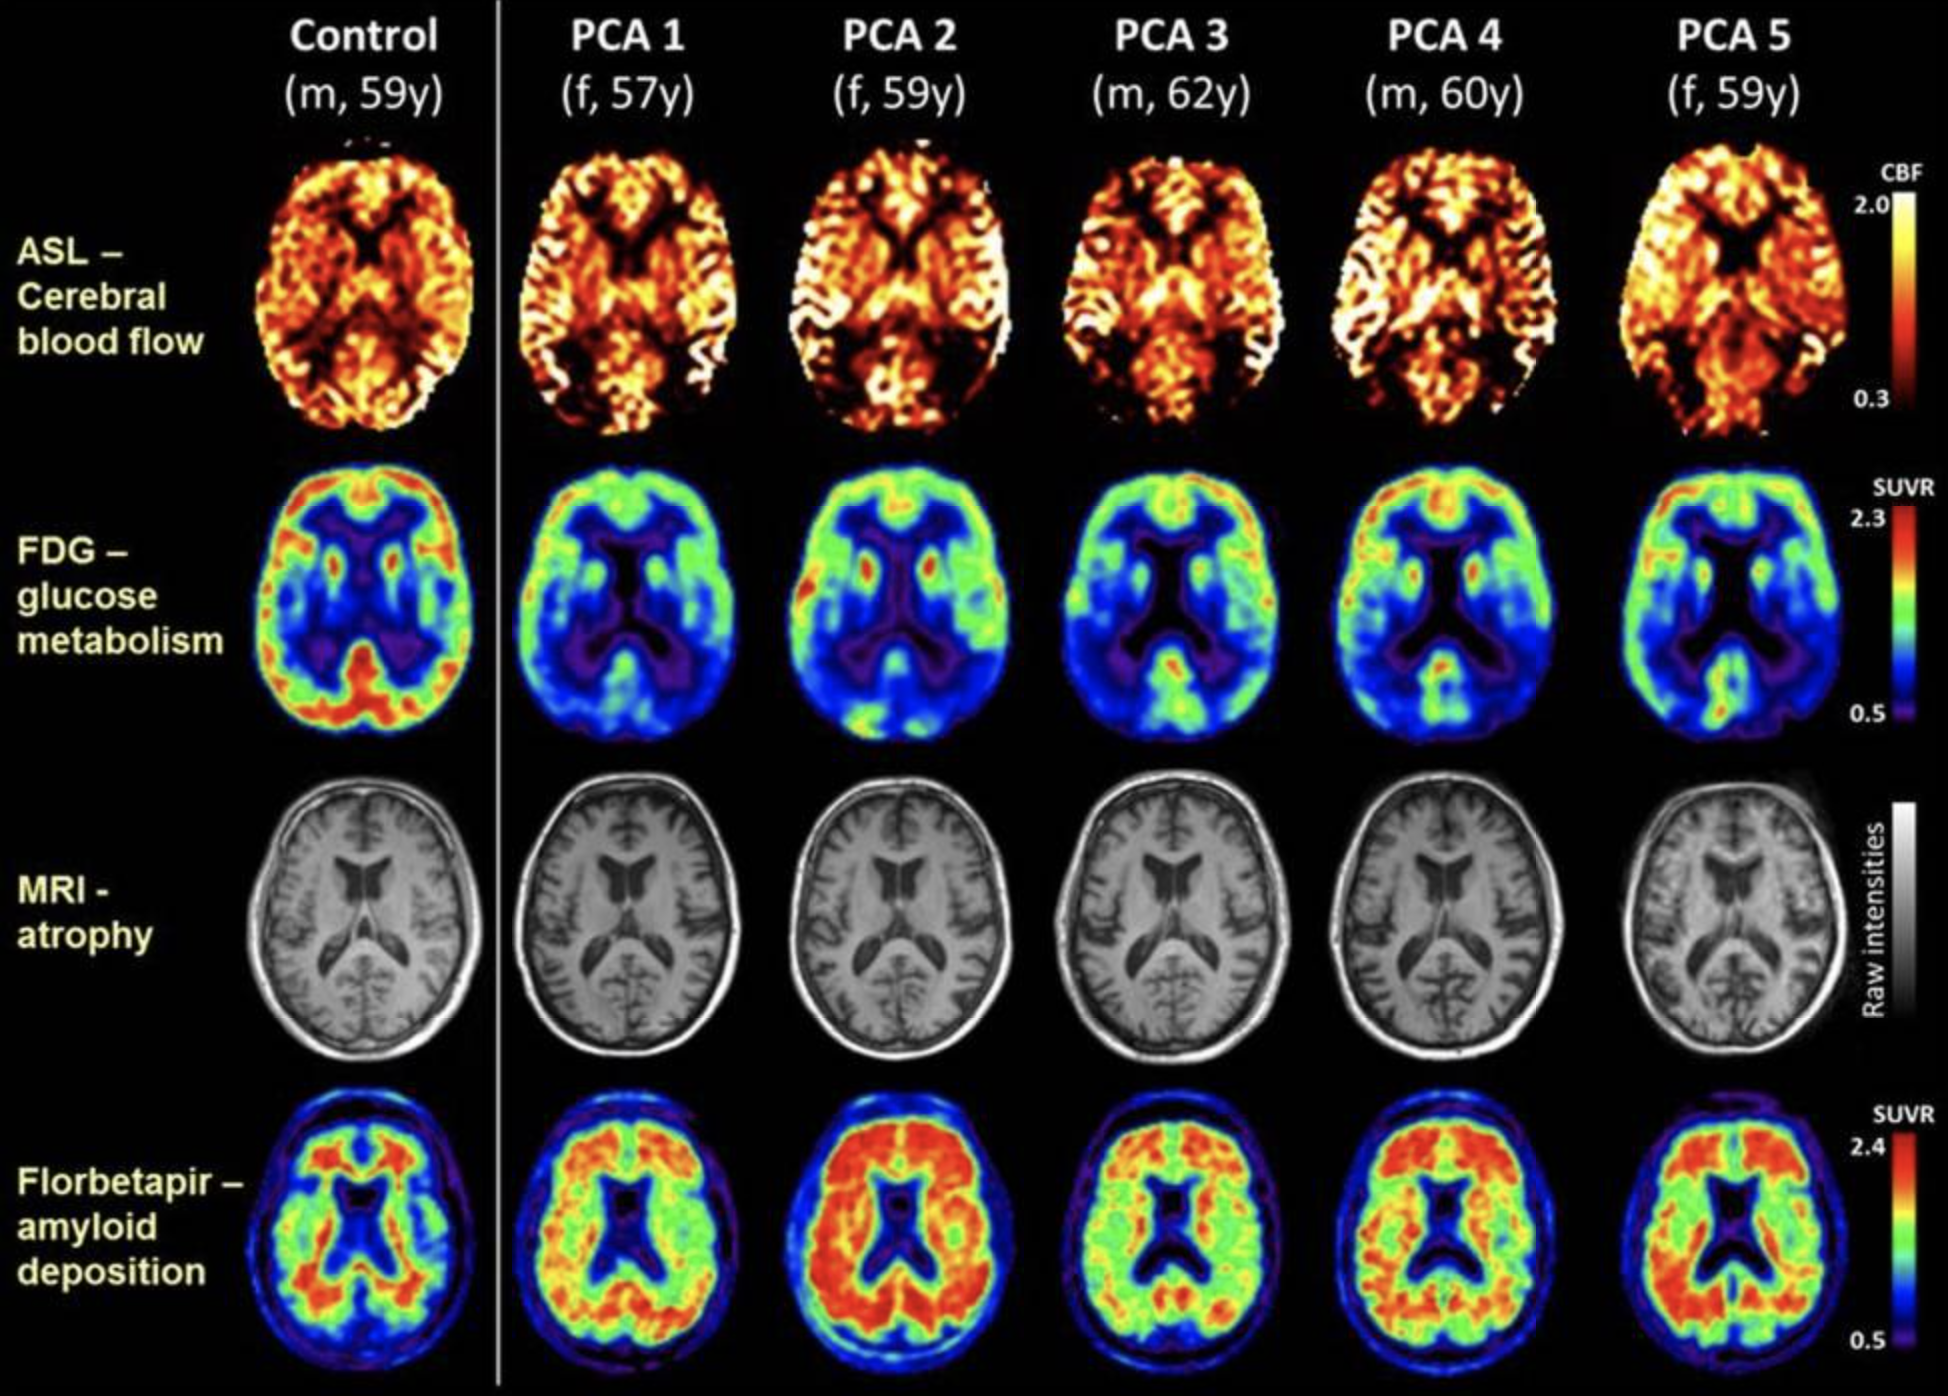 Single-participant axial images for one control participant and five patients with PCA showing cerebral blood flow (ASL), glucose metabolism (FDG-PET), atrophy (structural MRI), and amyloid deposition (florbetapir-PET). For clinical purposes, 18F-florbetapir images should be read on a grey scale. ASL, arterial spin labelling; CBF, cerebral blood flow; FDG-PET,18 F-labelled fluorodeoxyglucose positron emission tomography; PCA, posterior cortical atrophy; SUVR, standard uptake value ratio.